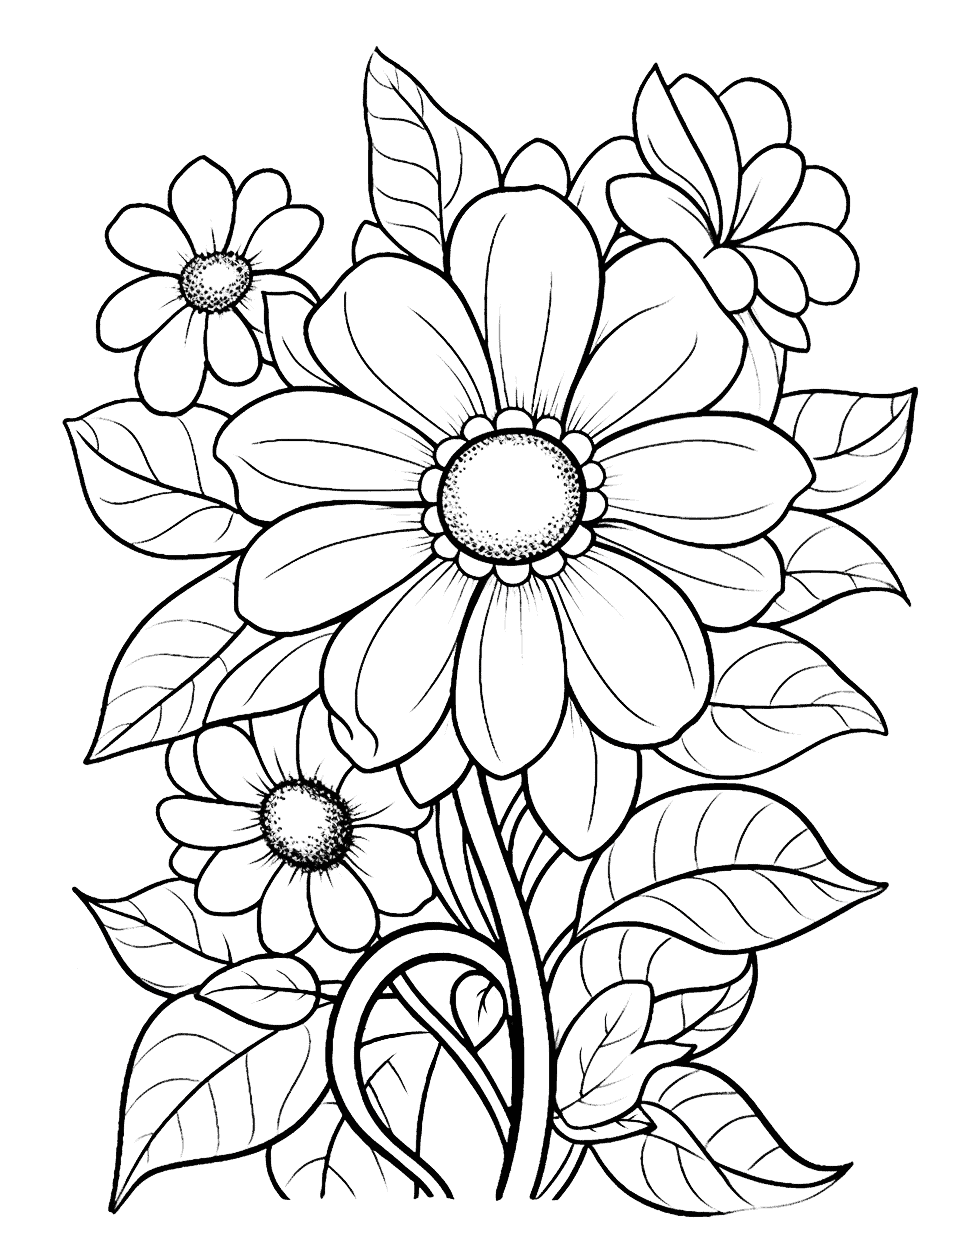 Flower Coloring Pages  Free, Printable Flower Coloring Sheets